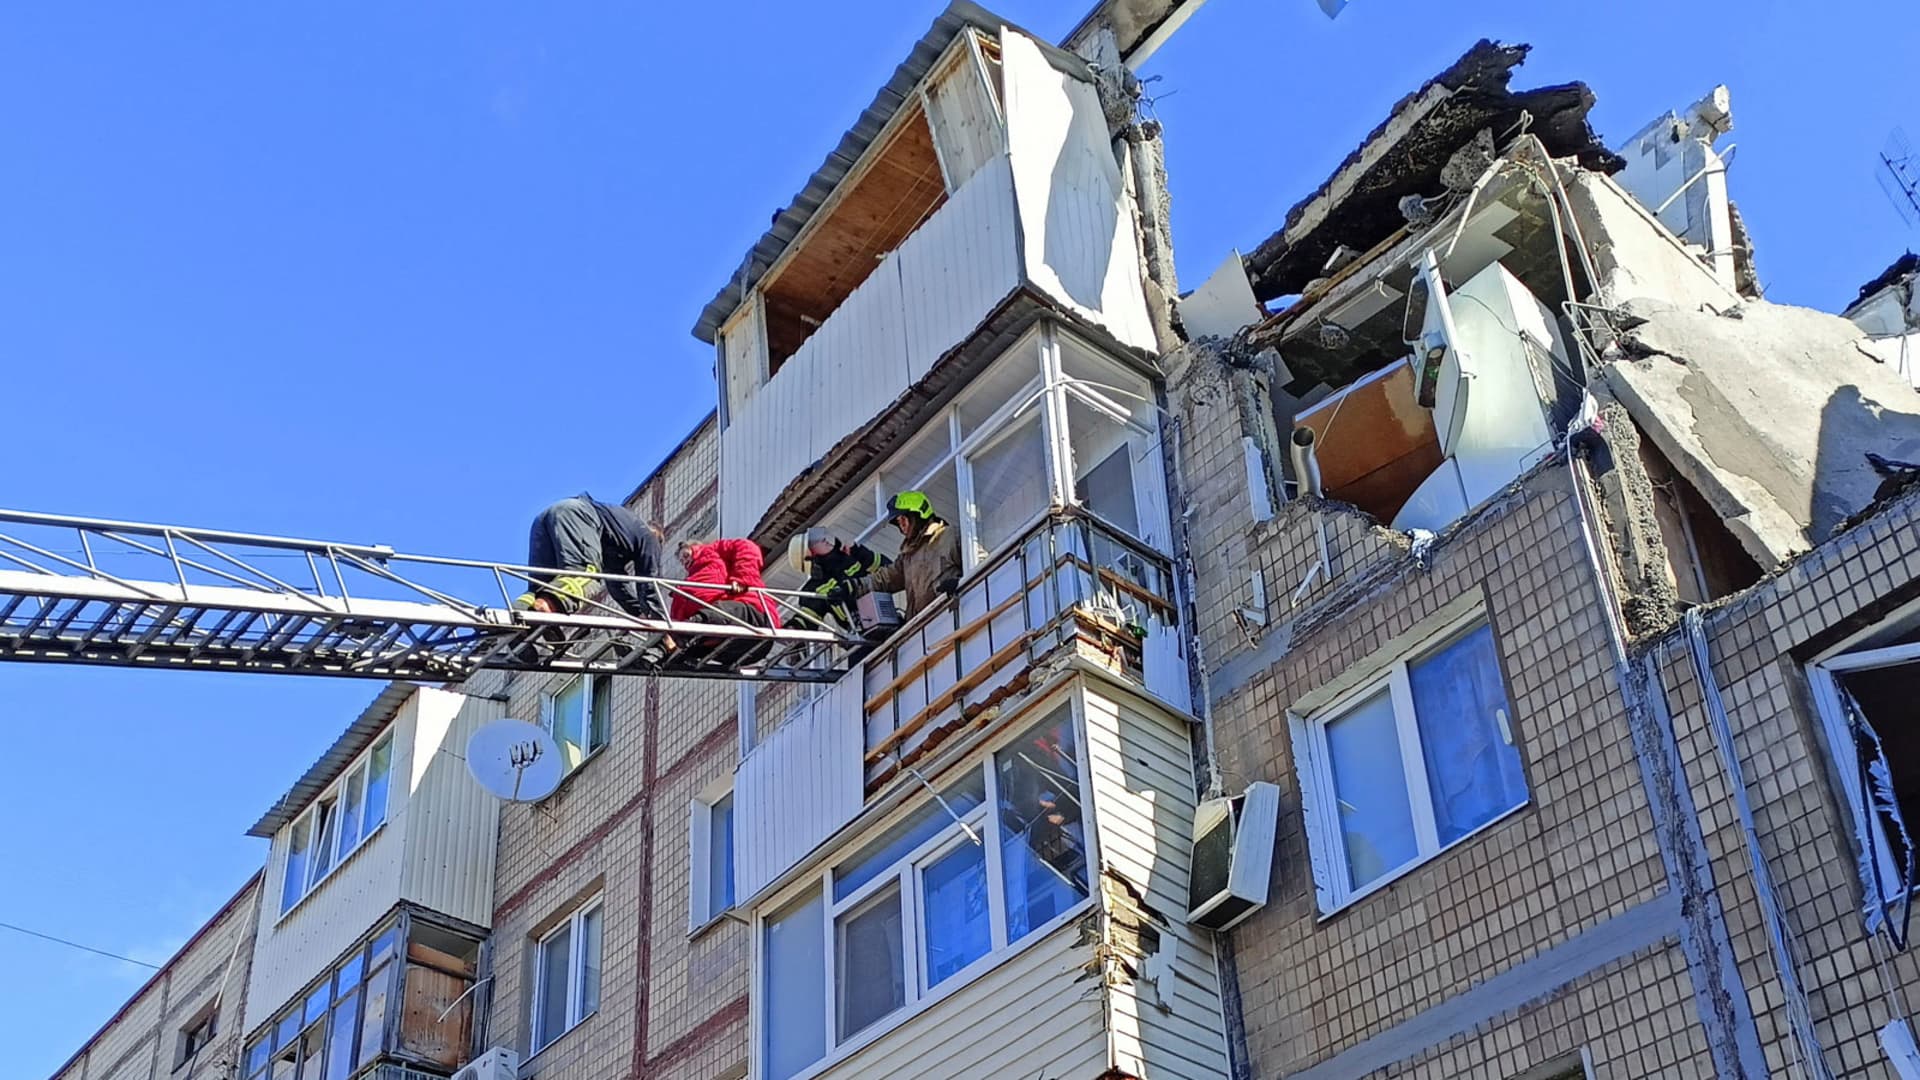 Rescuers evacuate a woman from a residential building damaged by an airstrike, as Russia?s attack on Ukraine continues, in Kharkiv, Ukraine March 15, 2022.